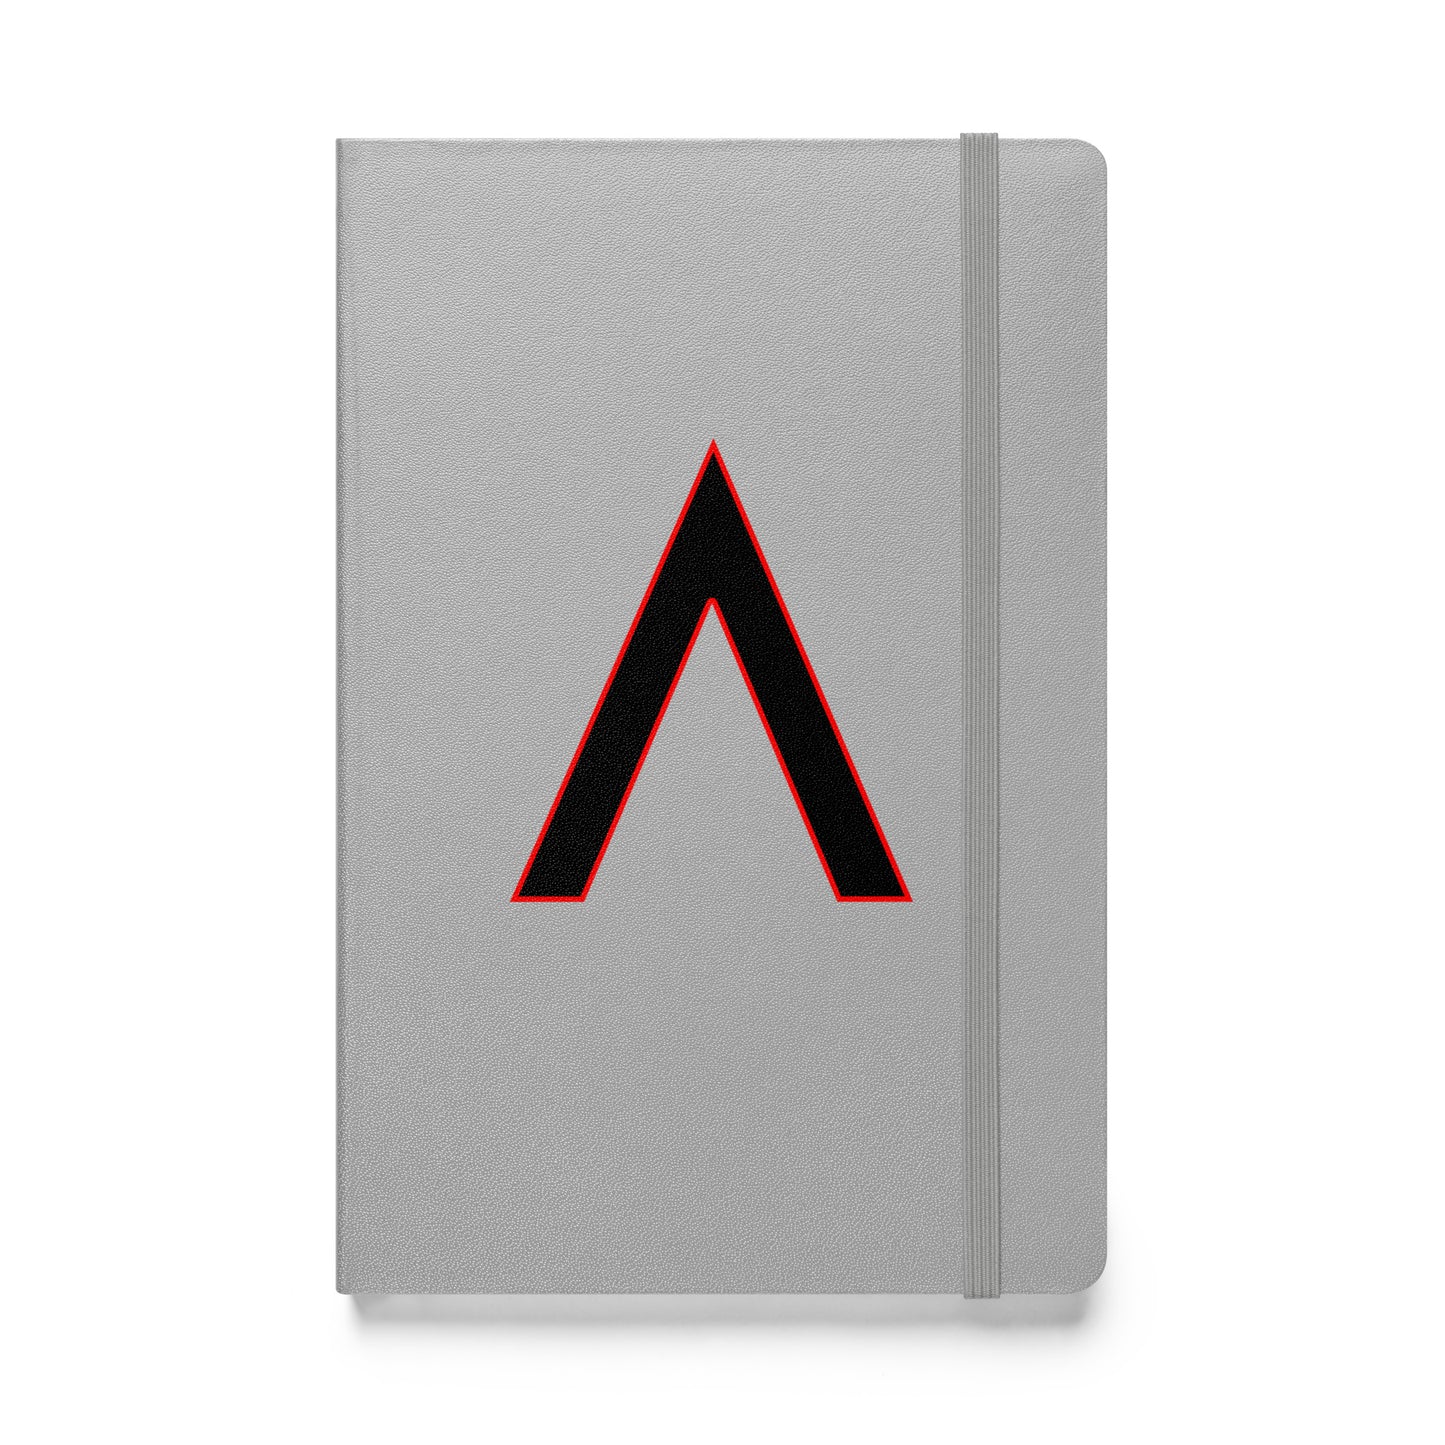 The Triangle - Hardcover bound notebook